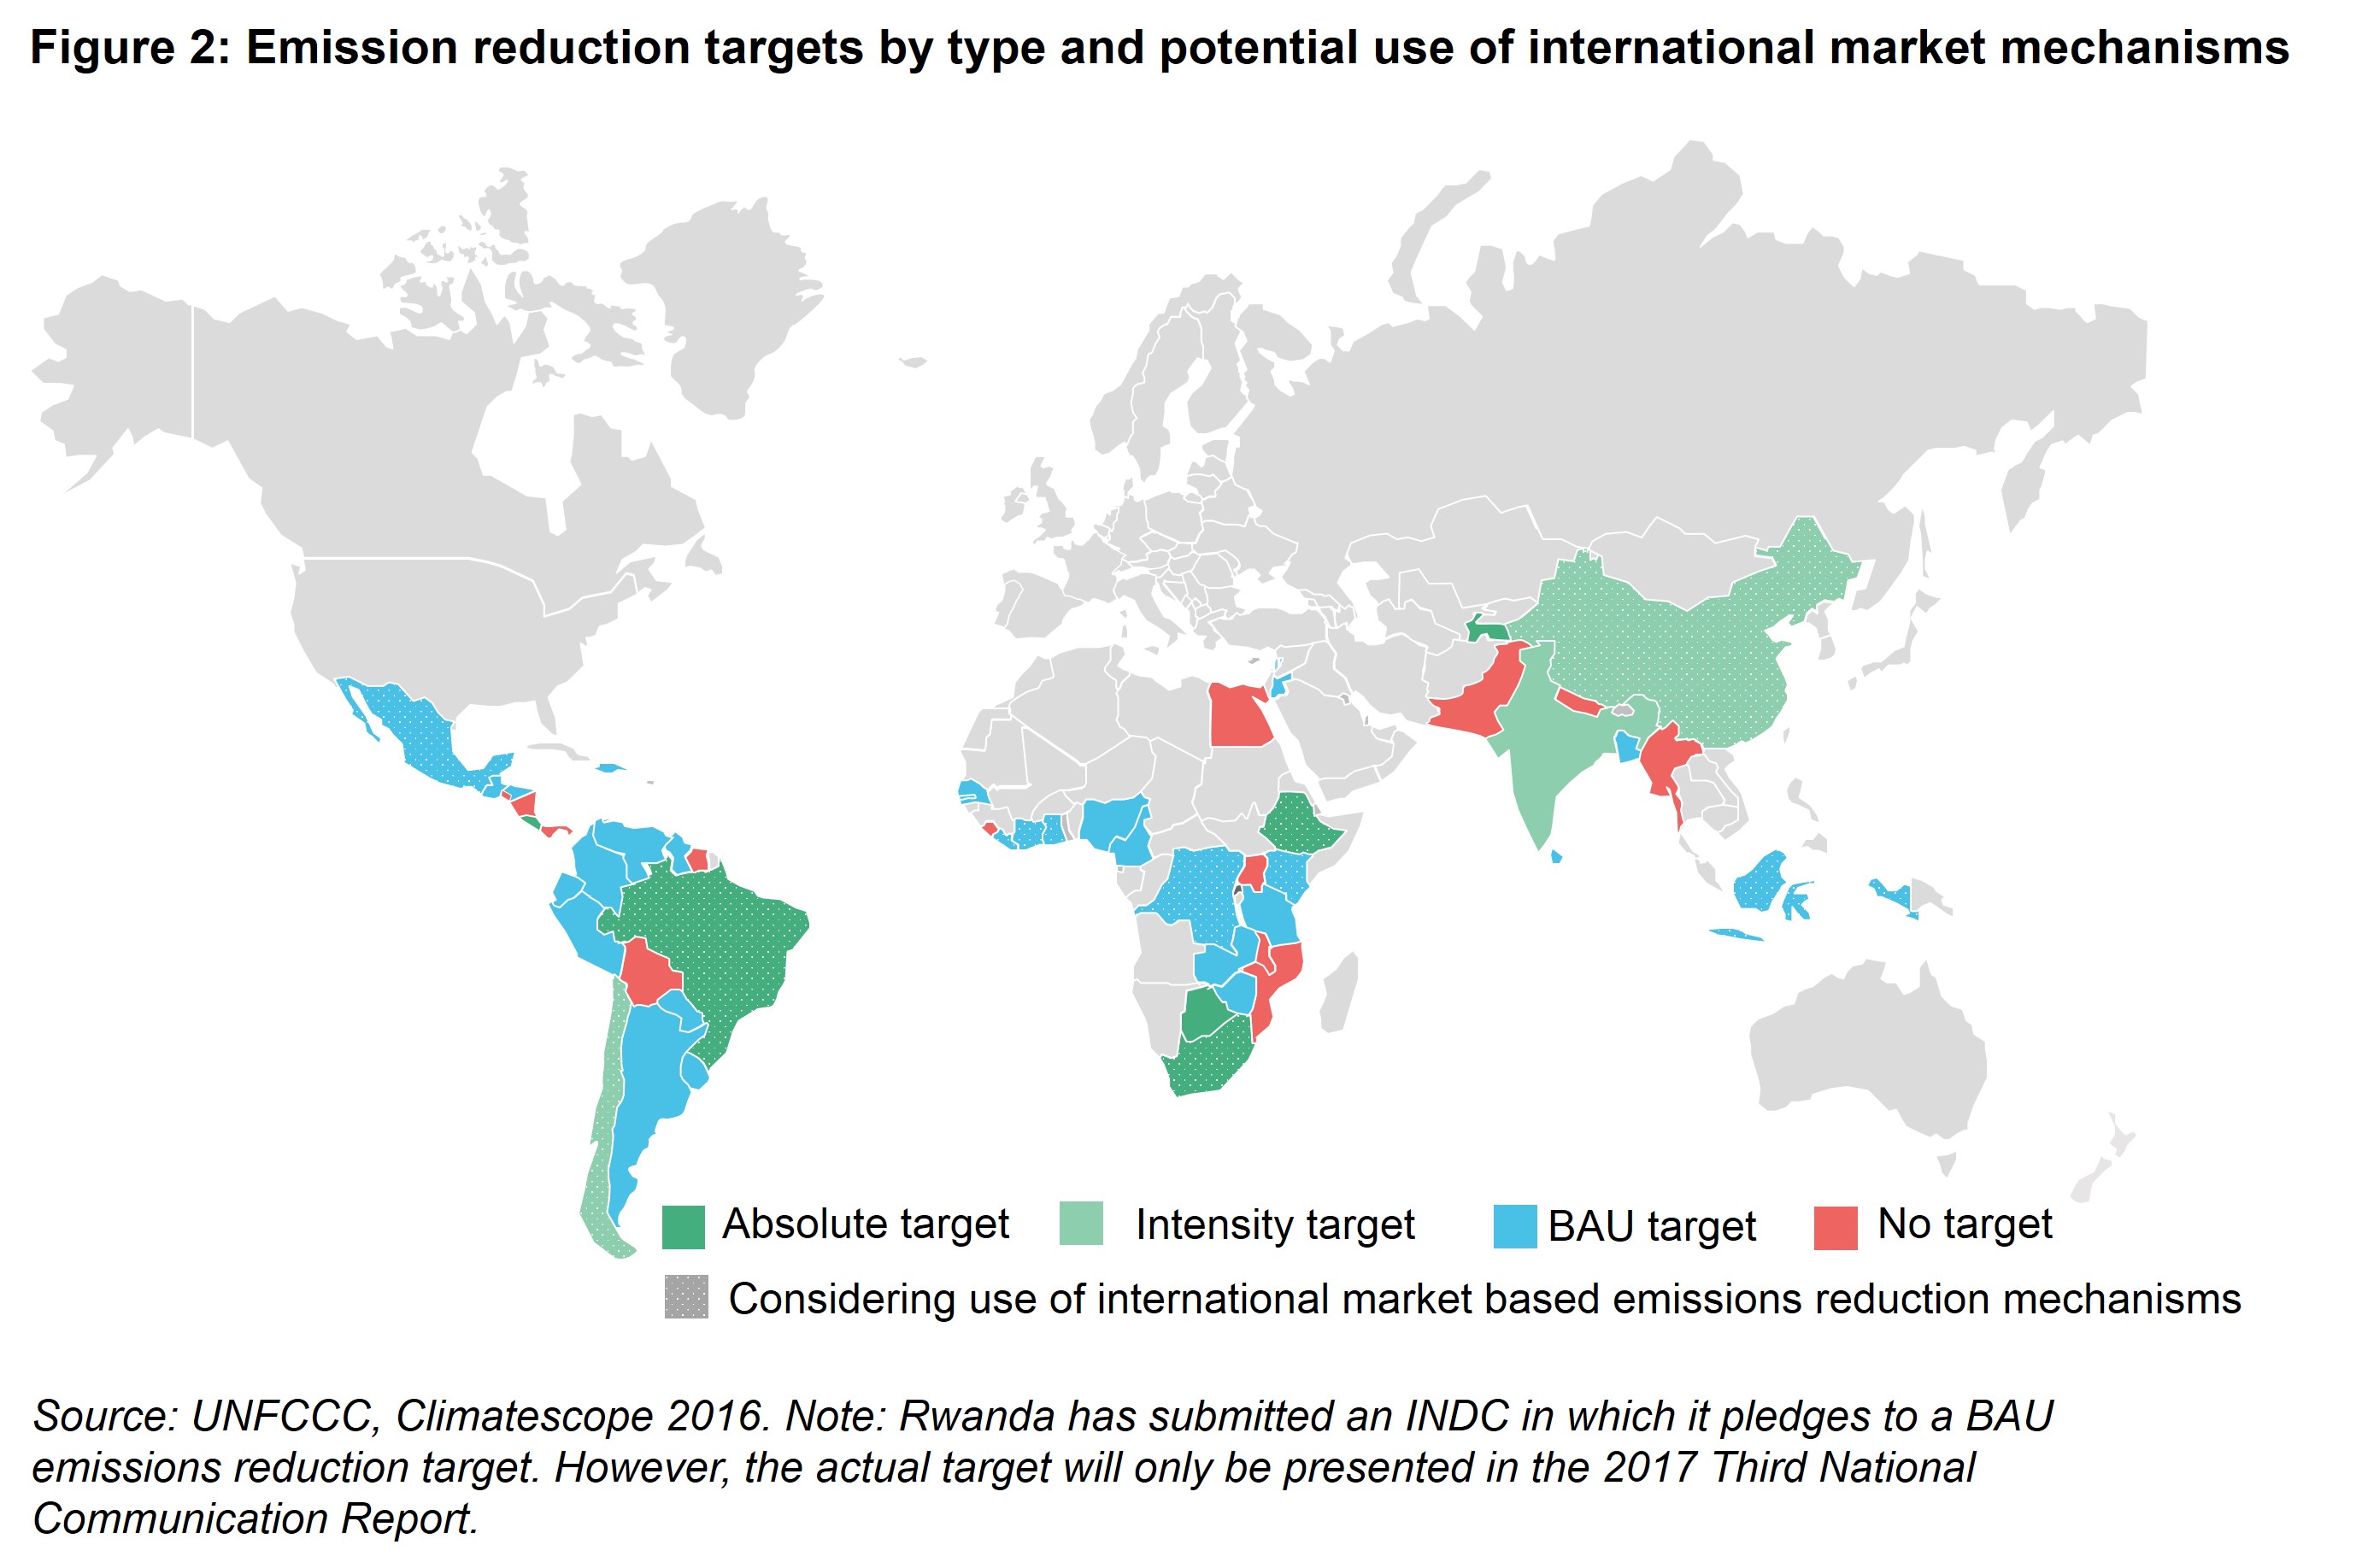 PIV Fig 2 - Emission reduction targets by type and potential use of international market mechanisms